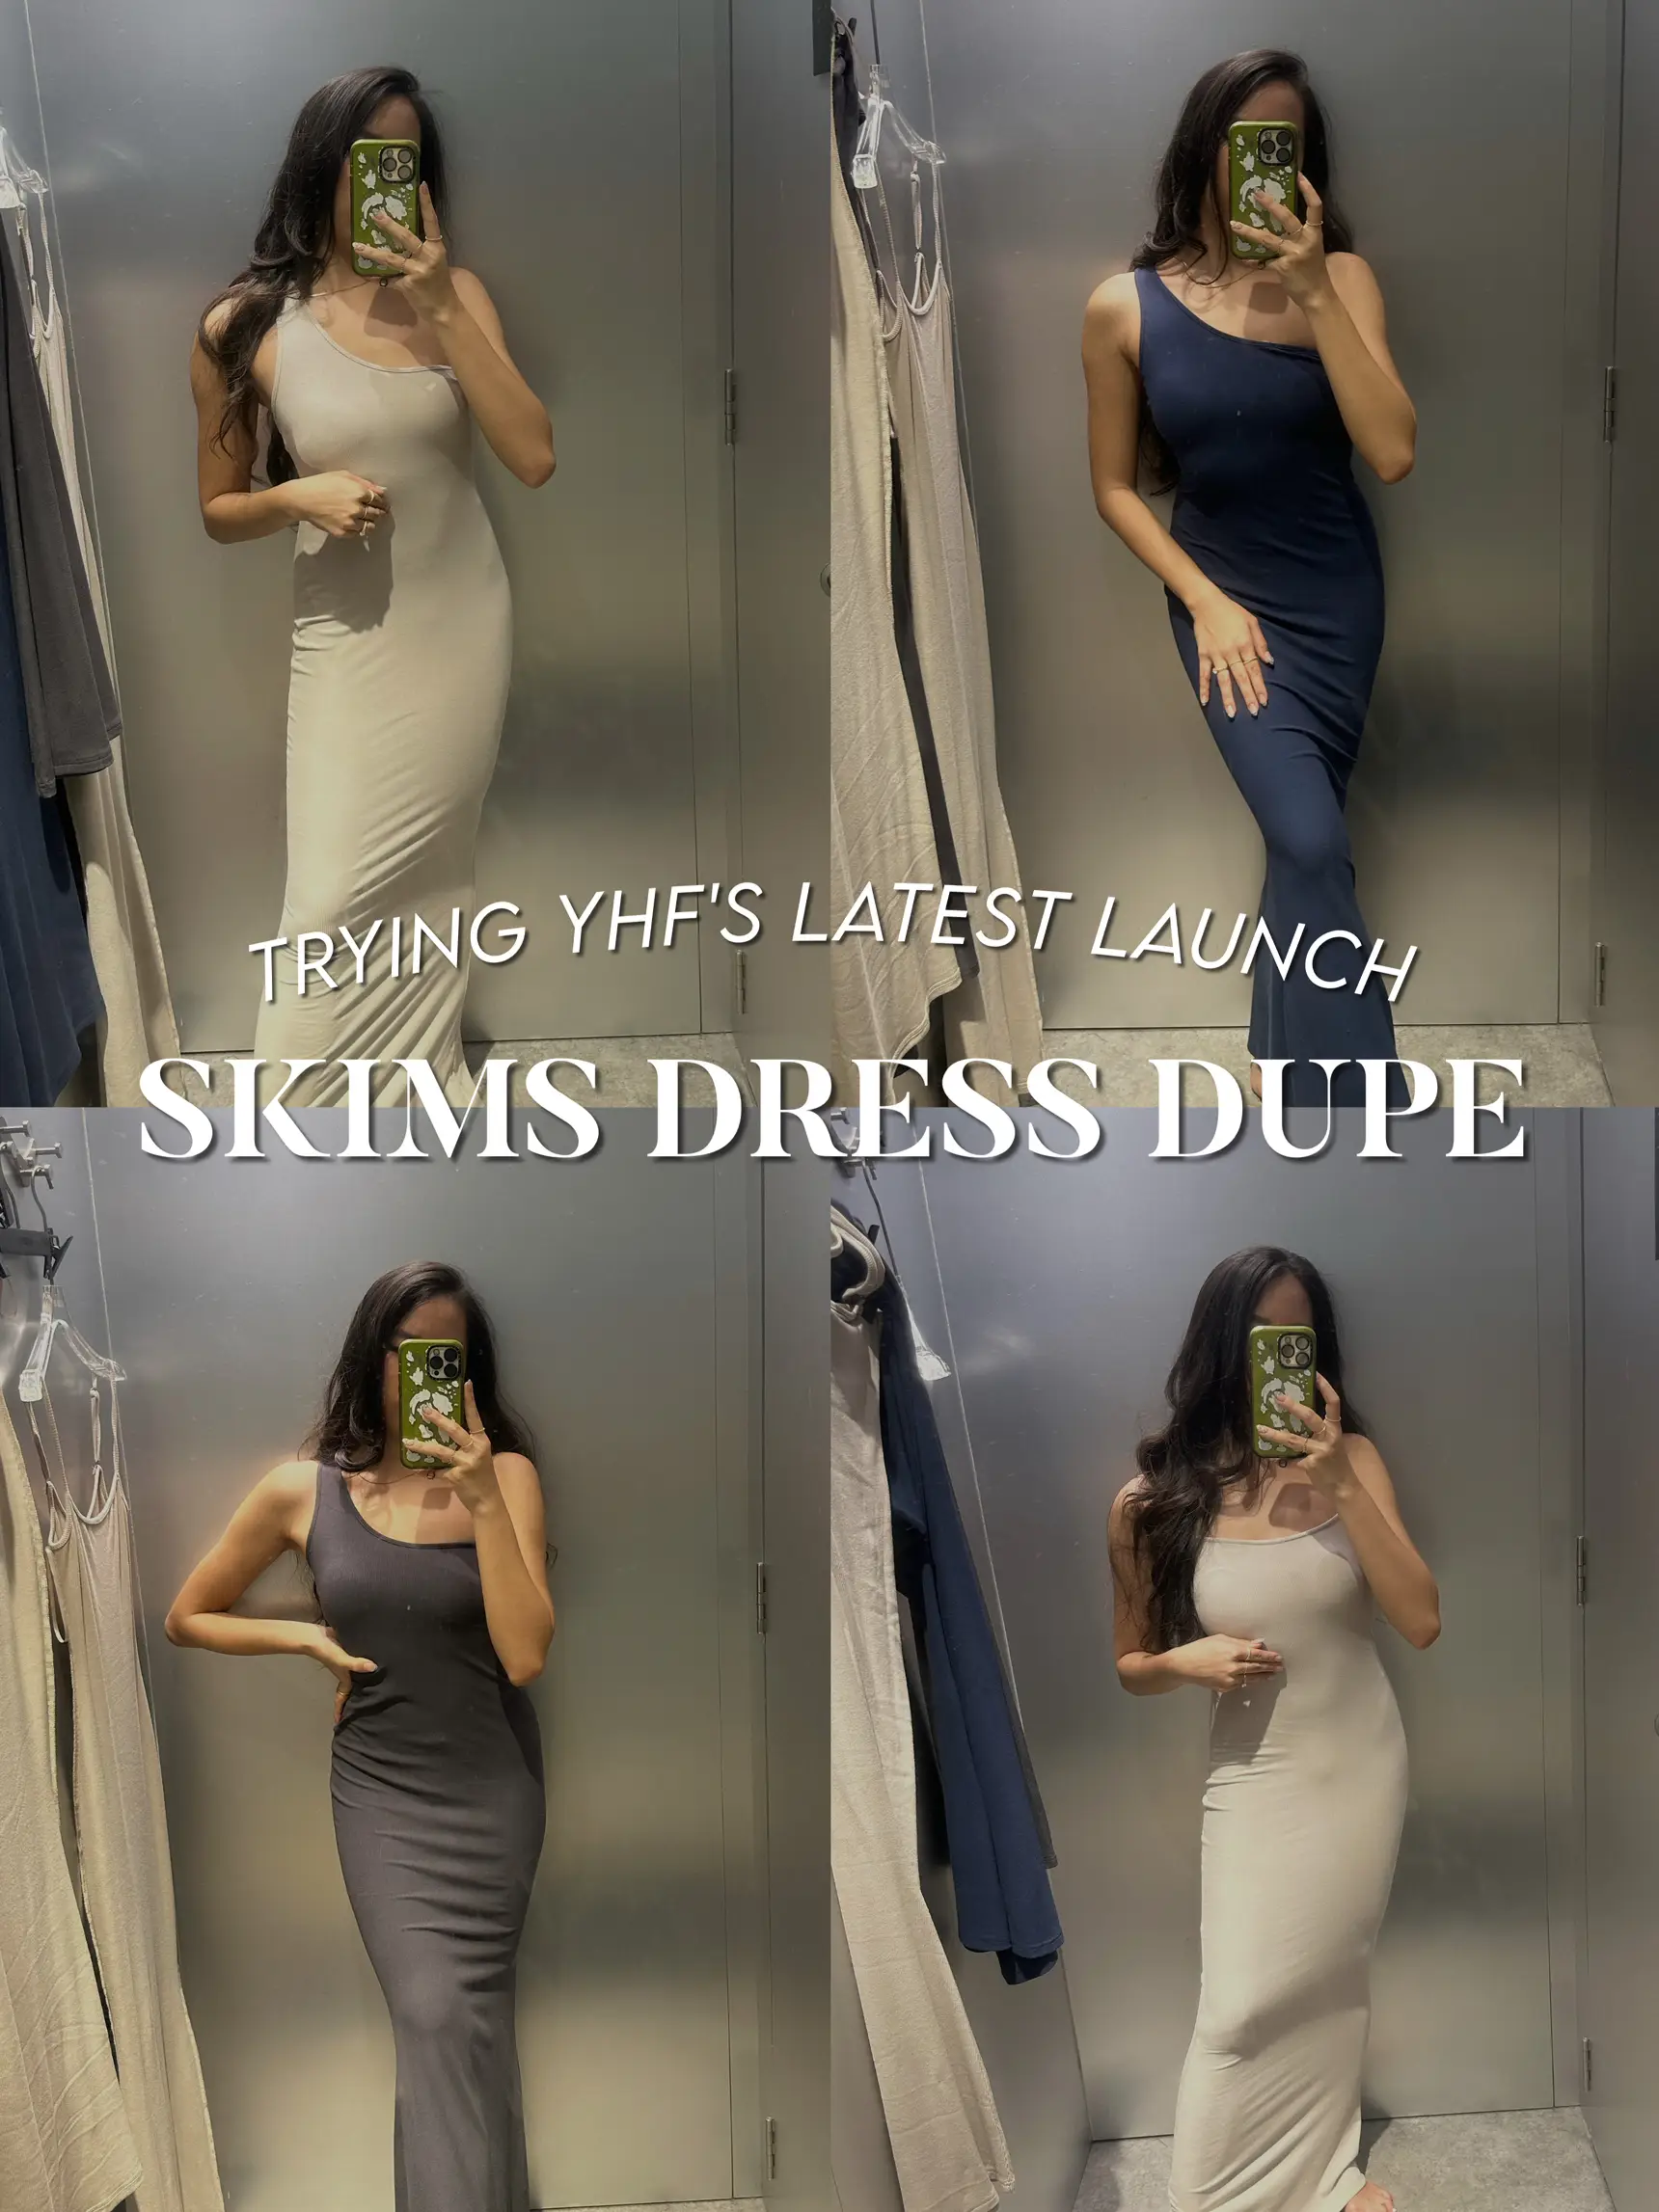 I legit own a Skims dress & bought loads of dupes to find the best